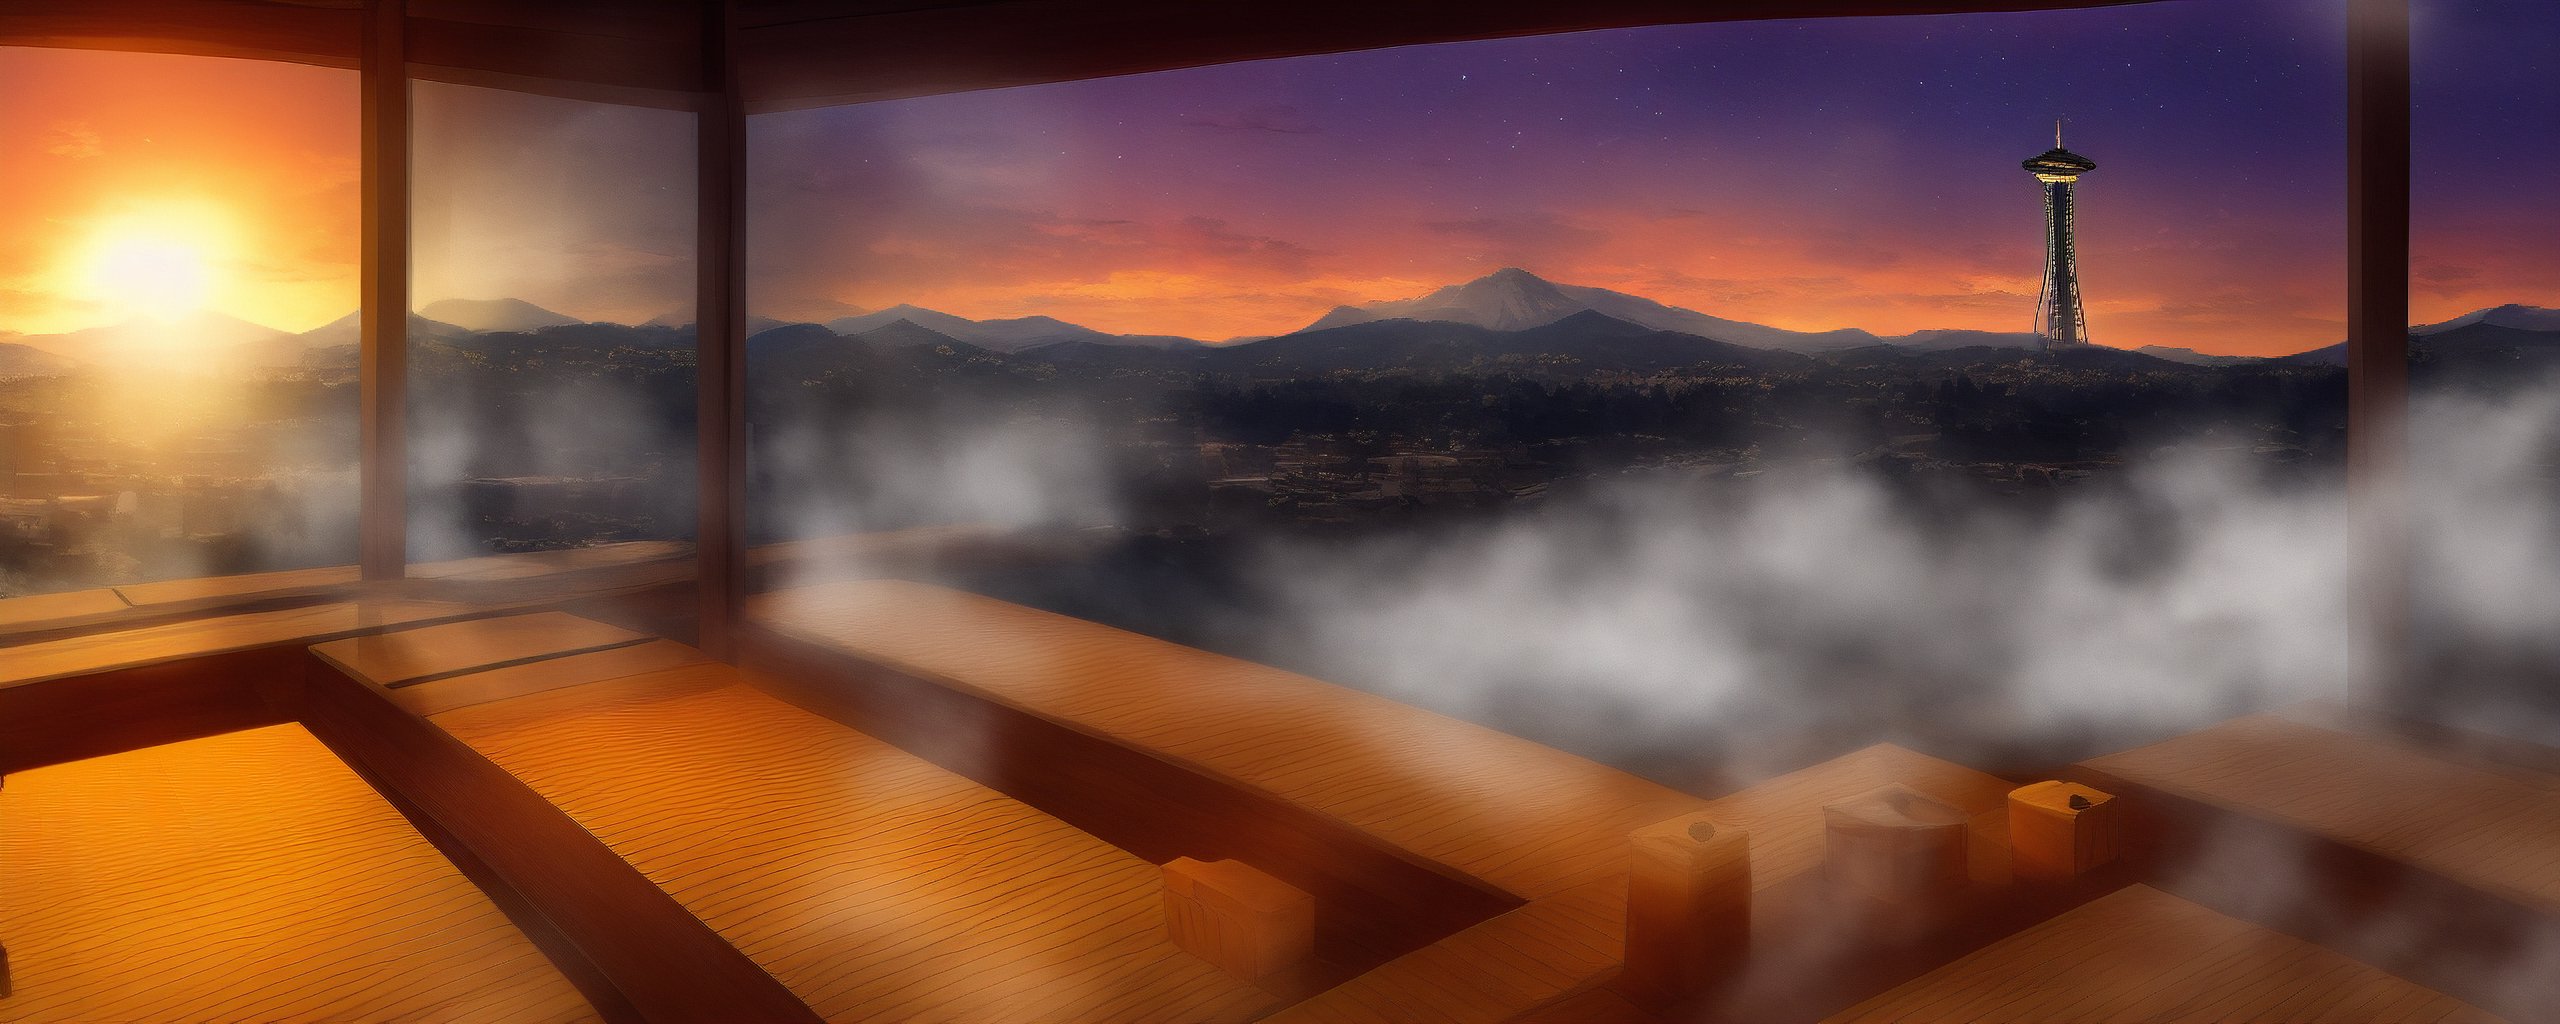 An image of zen, peaceful, onsen, shibuya, anime, coffee shop, colorful, manga, sunset, space needle, thick outlines, hyrule